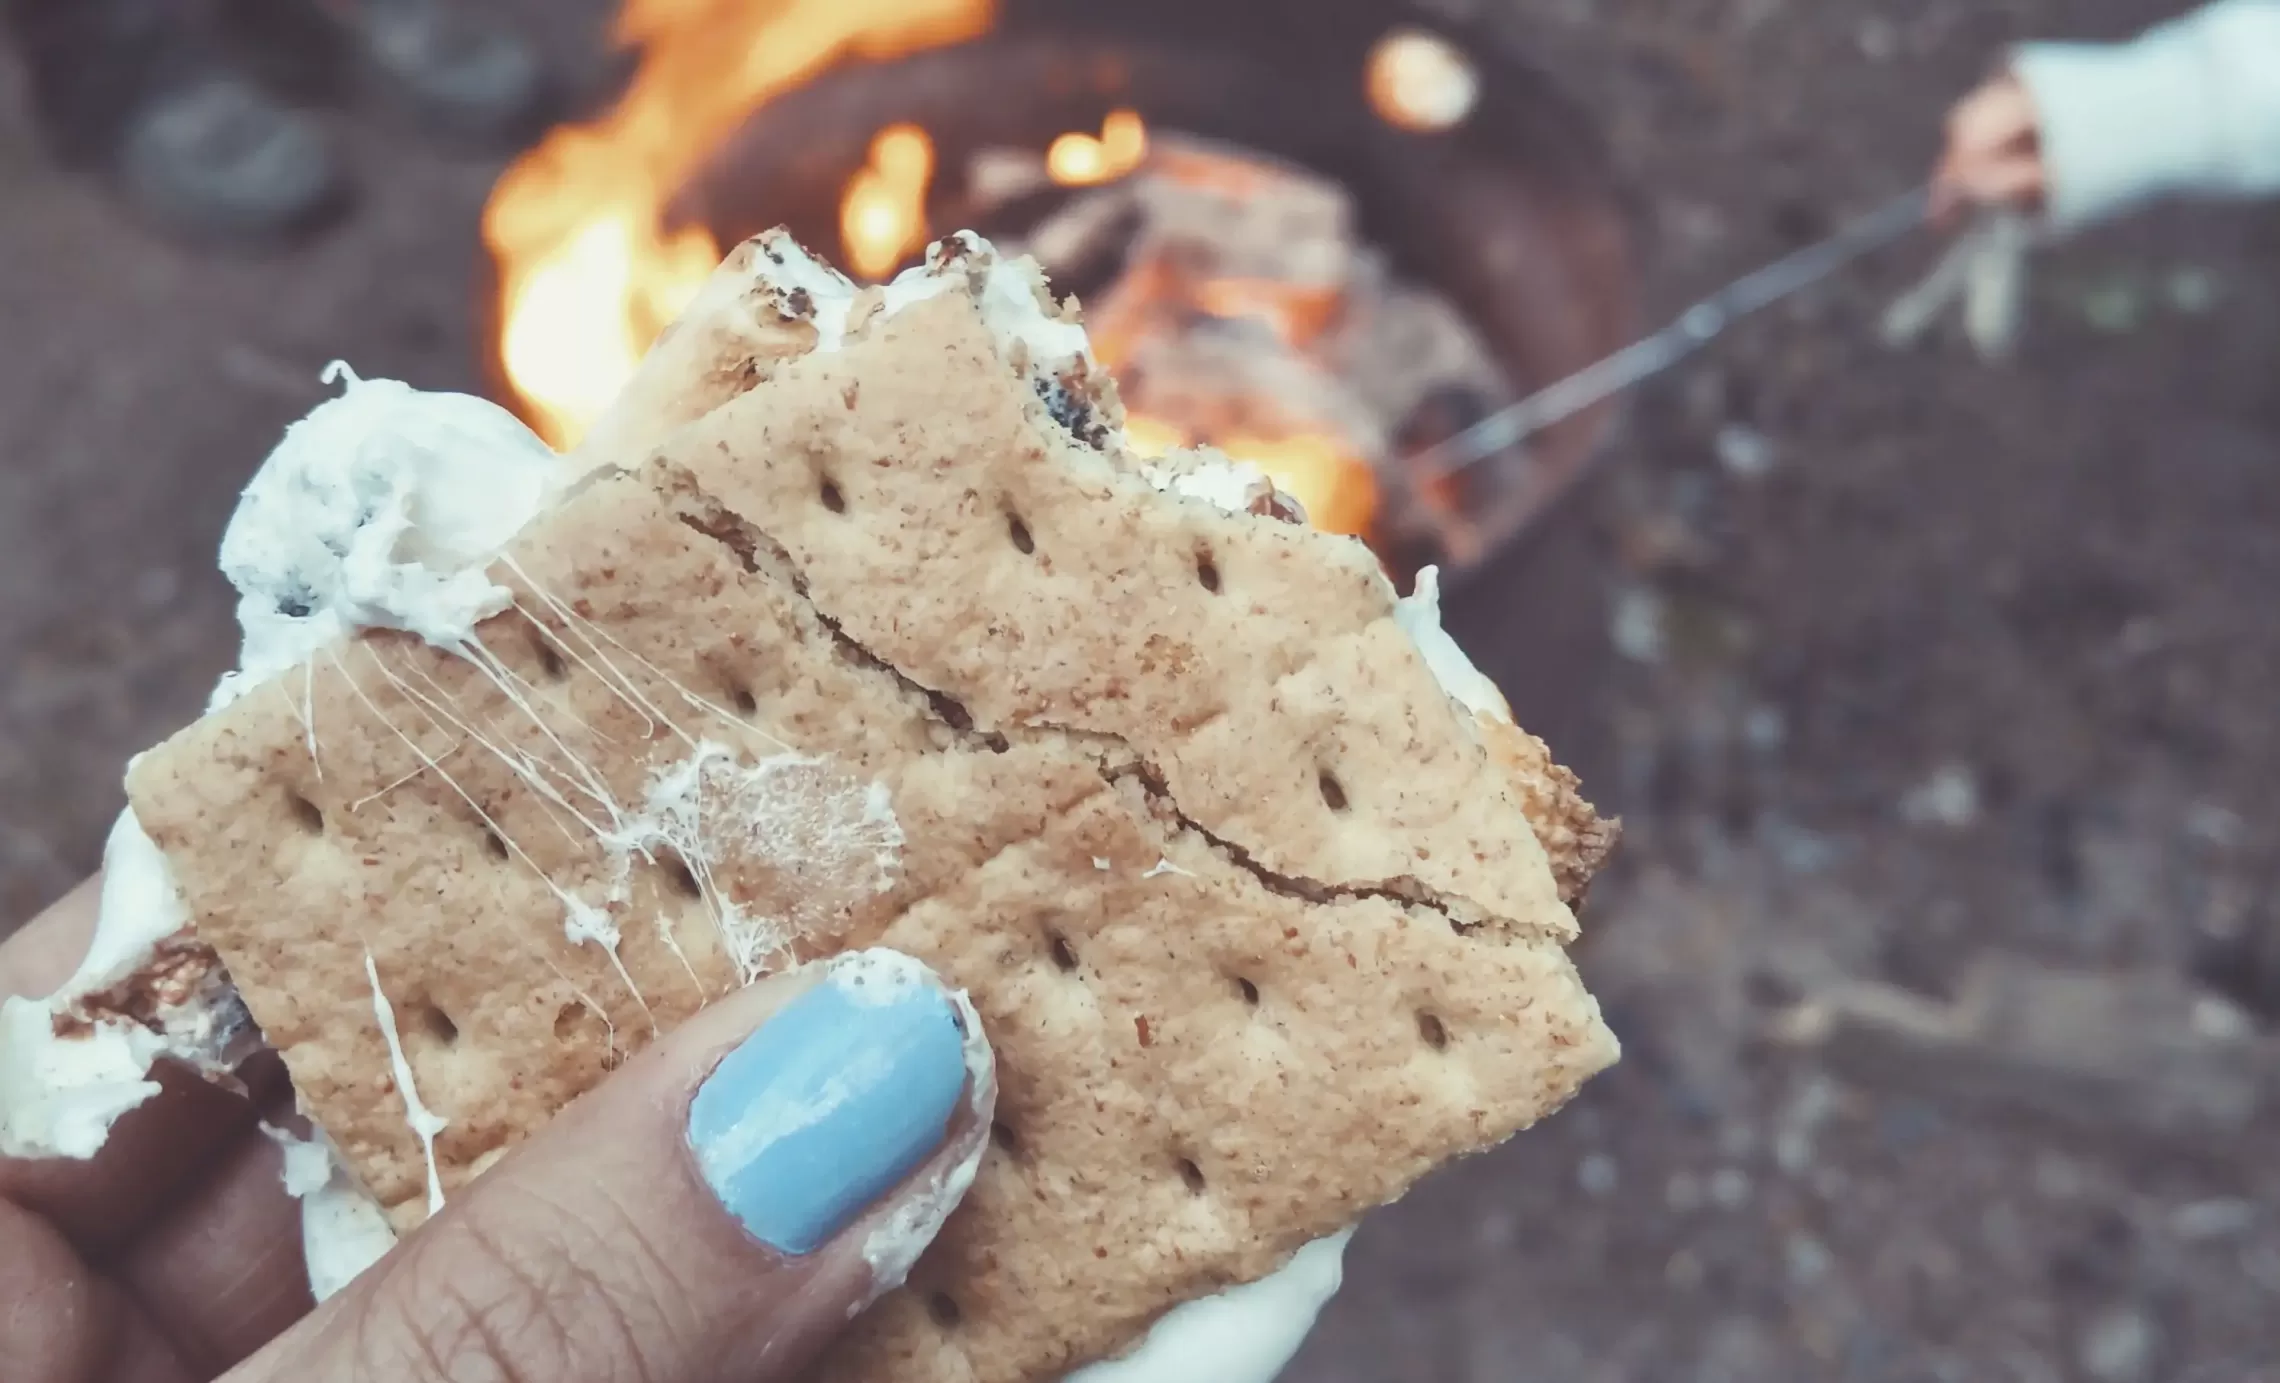 S'more by campfire